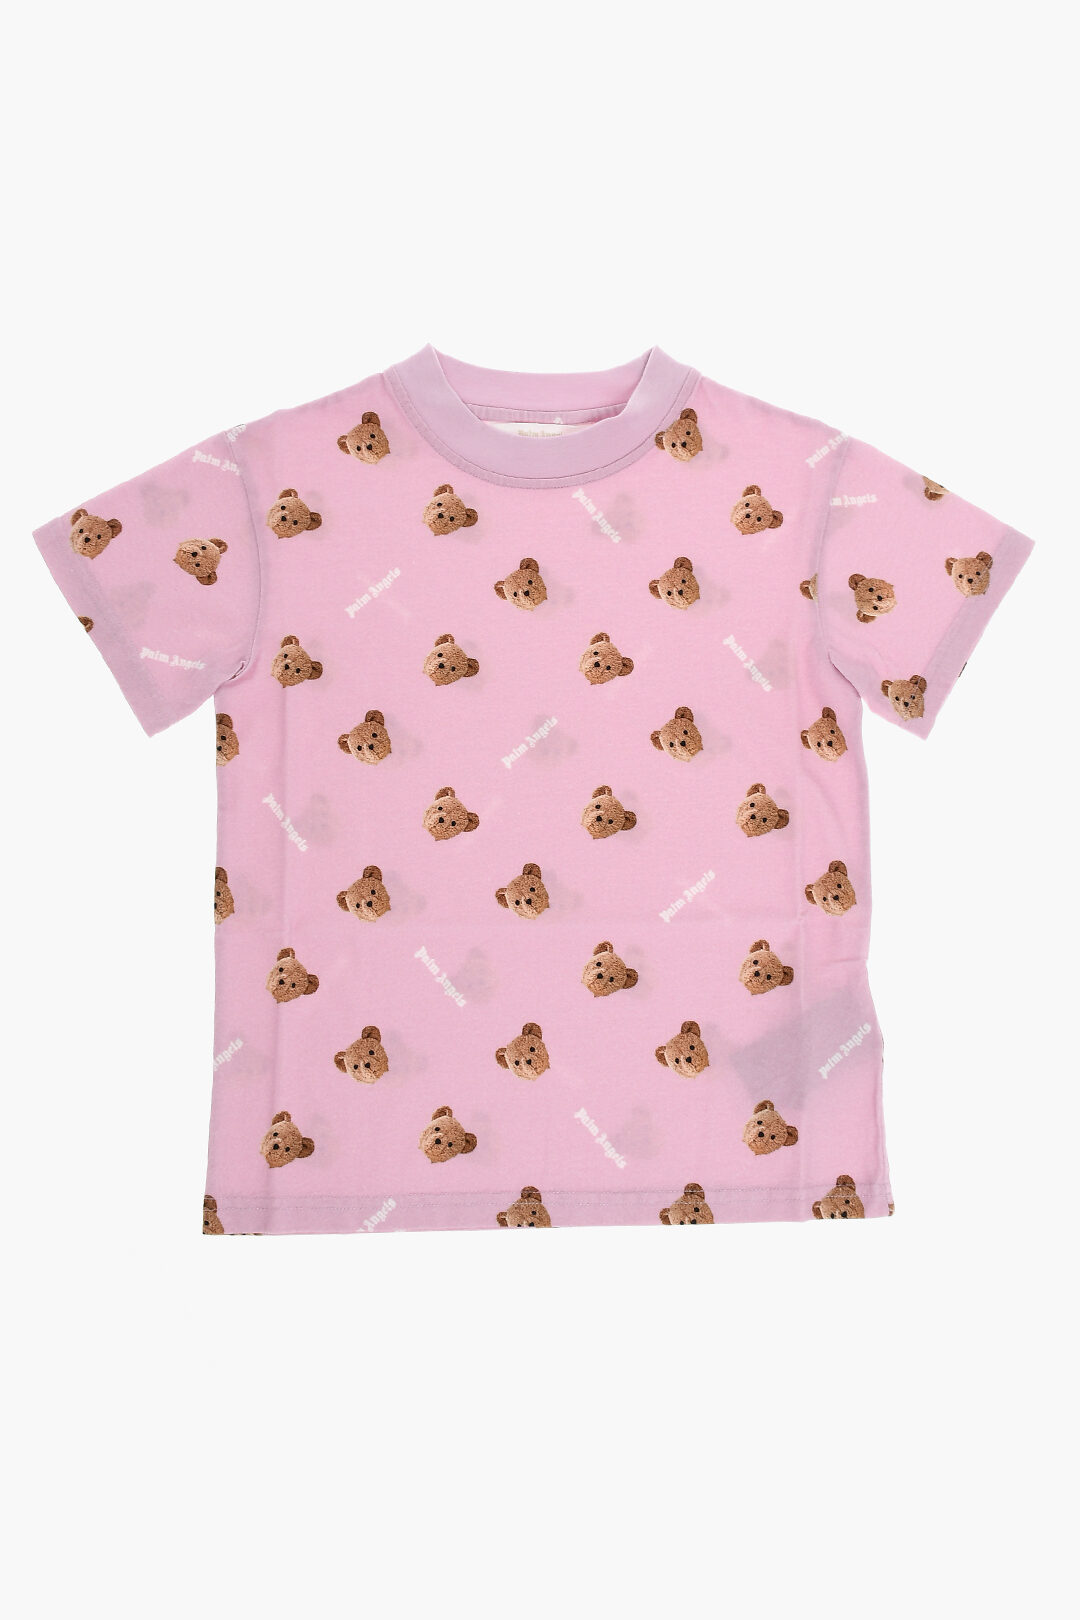 All-Over Teddy Bear Printed Crew-neck T-Shirt